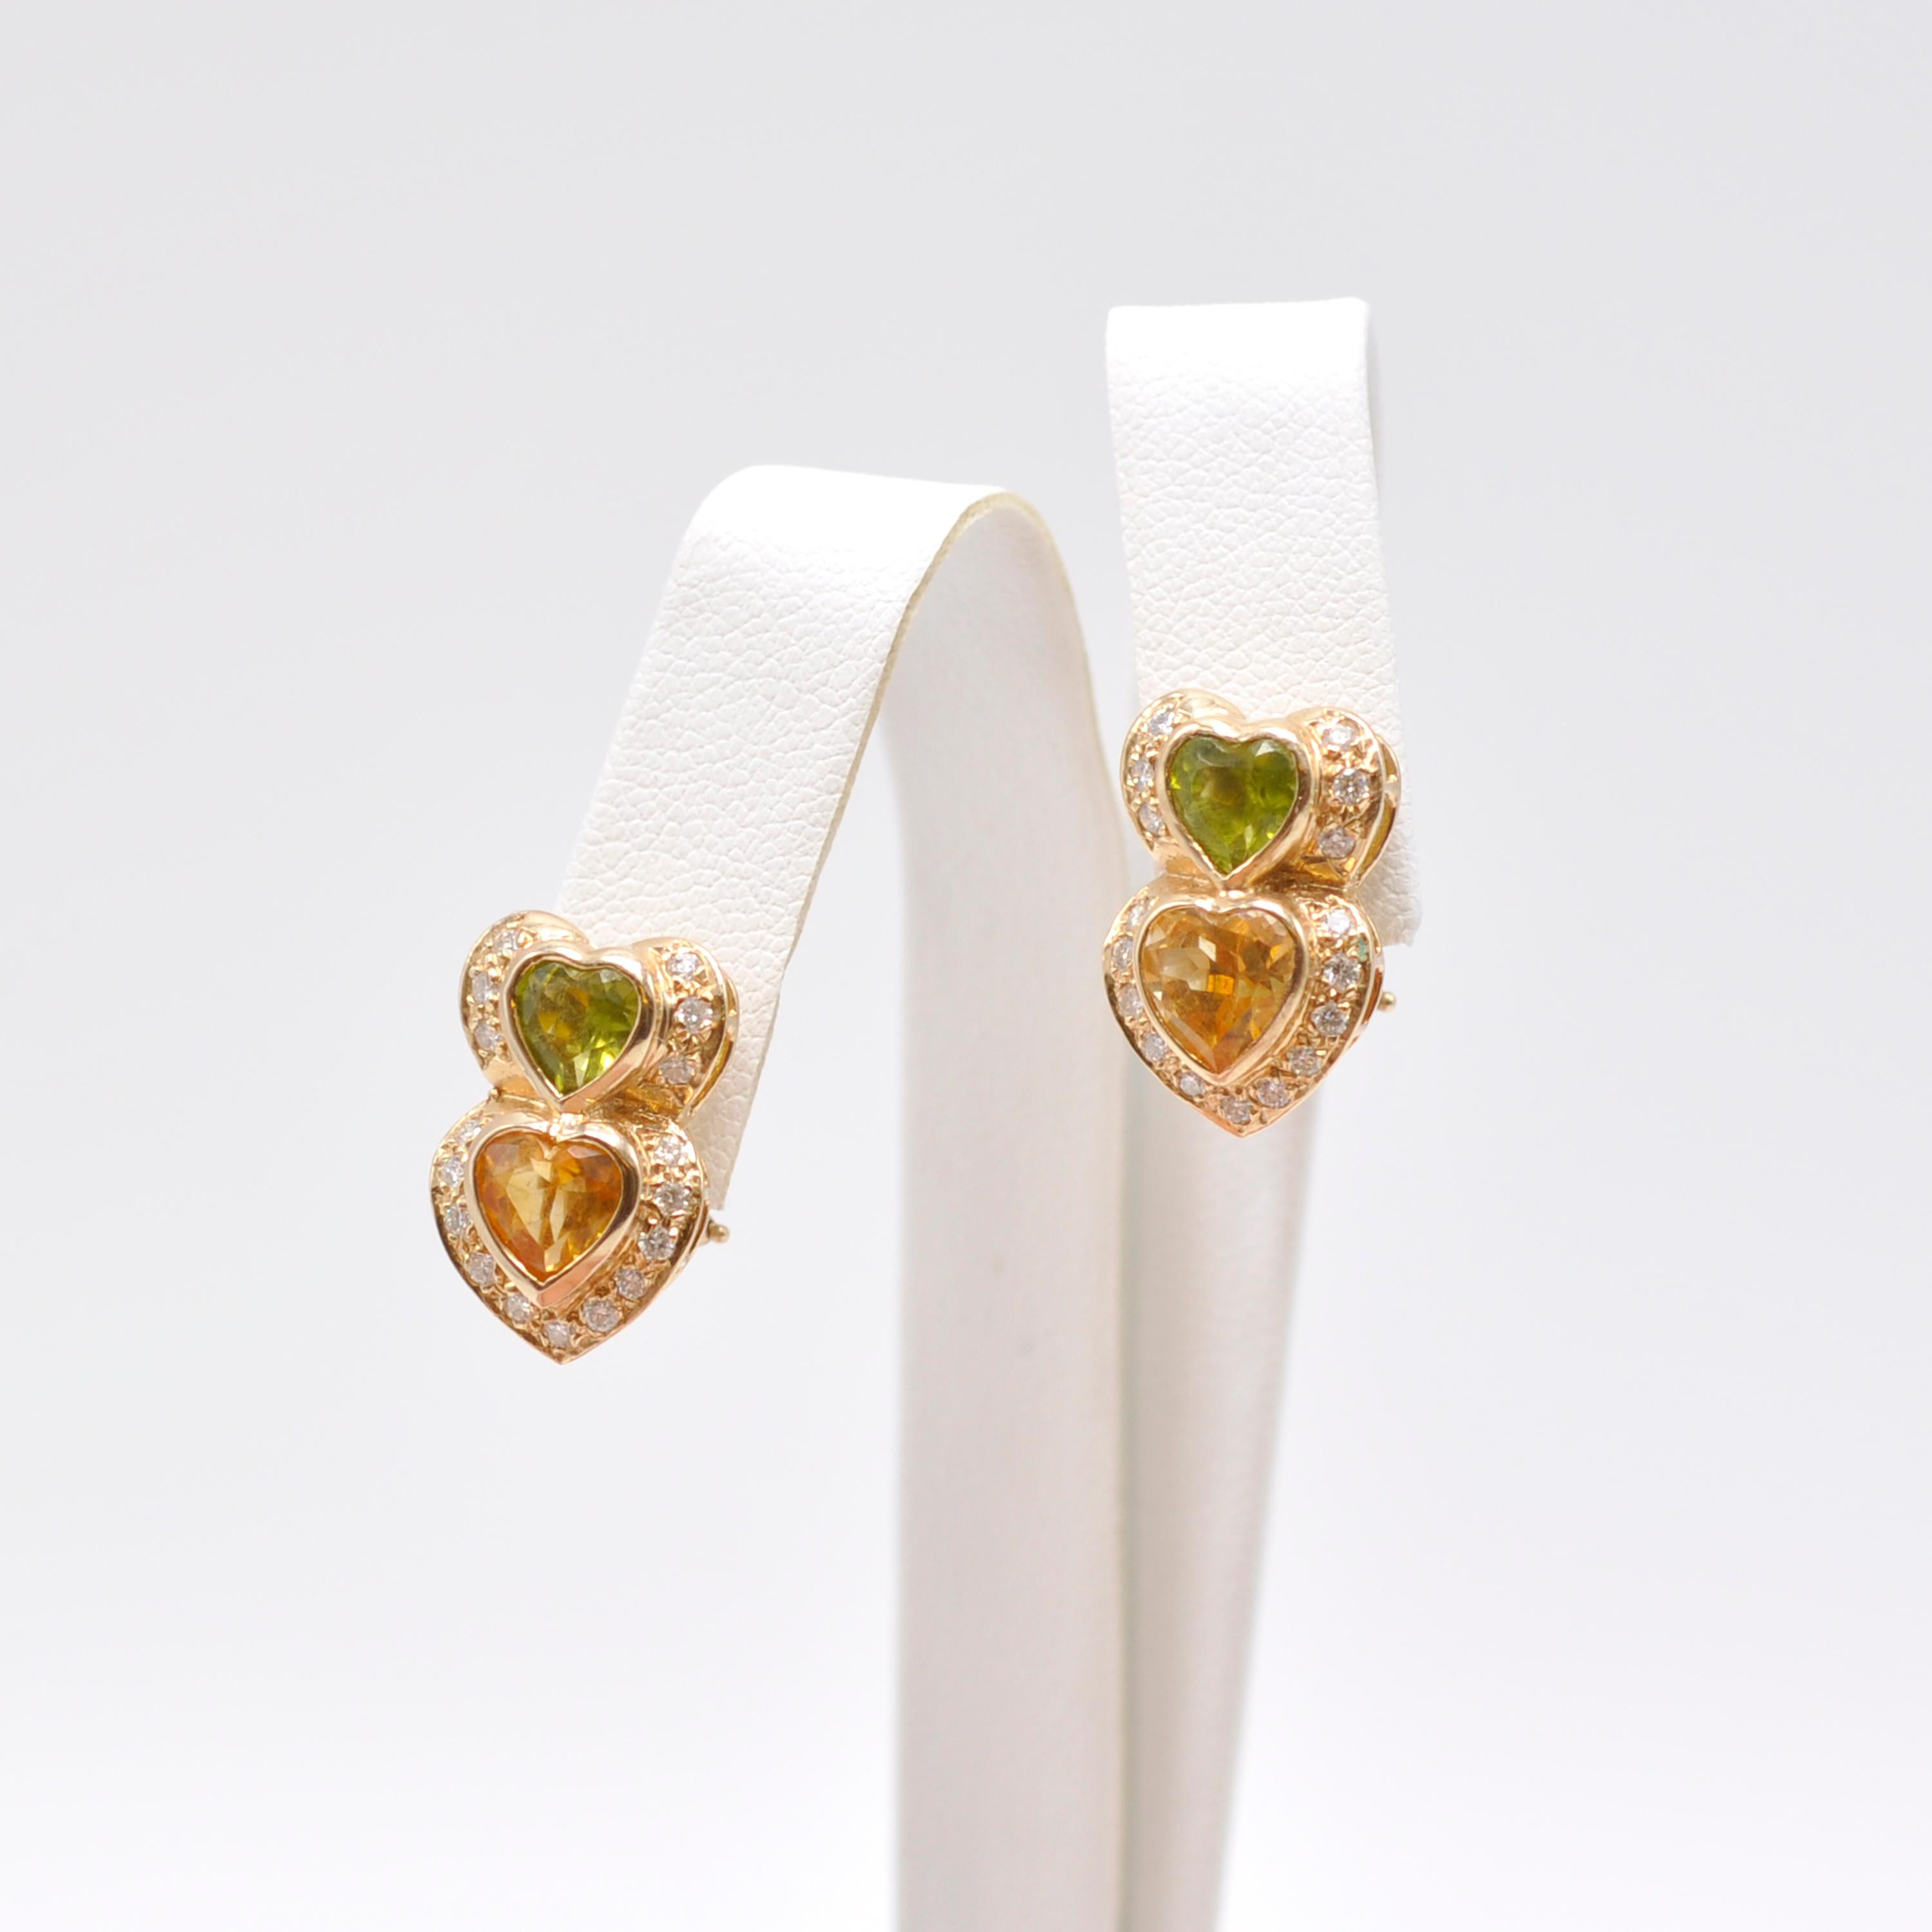 These darling earrings are the perfect for a gift for a loved one or yourself! 

Peridot hearts sit on top of citrine hearts surrounded by .3 cts of round cut diamonds all set in 14 Karat yellow gold. Post clip backs secure the earrings to your ear